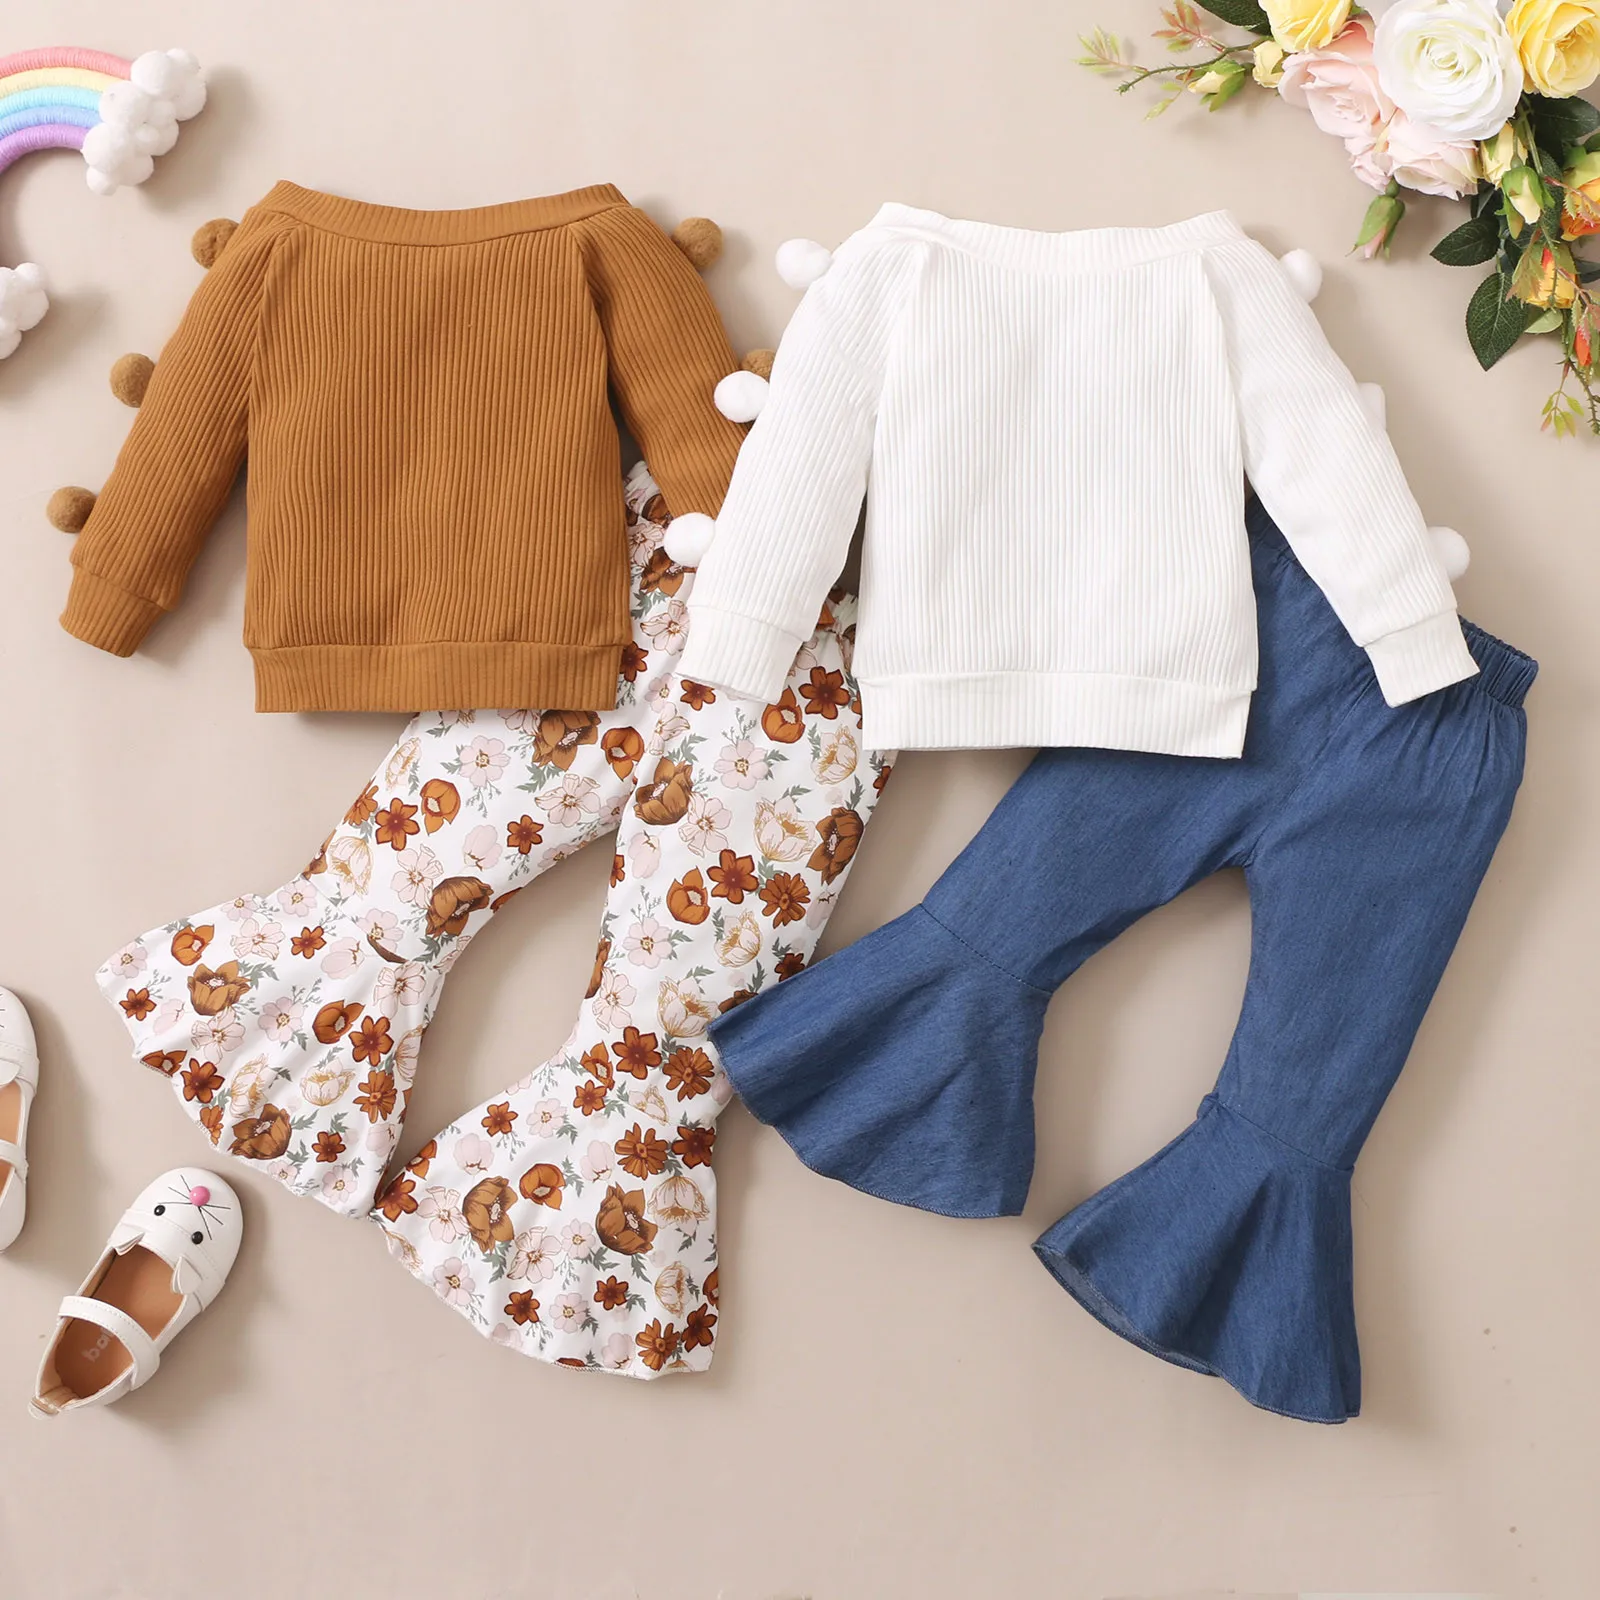 Autumn Winter Toddler Girls Clothes Set Fur Ball Long Sleeve Top Flare Pants 2PCS Girl Casual Outfits 6 Month To 4 Years Baby Clothing Set discount